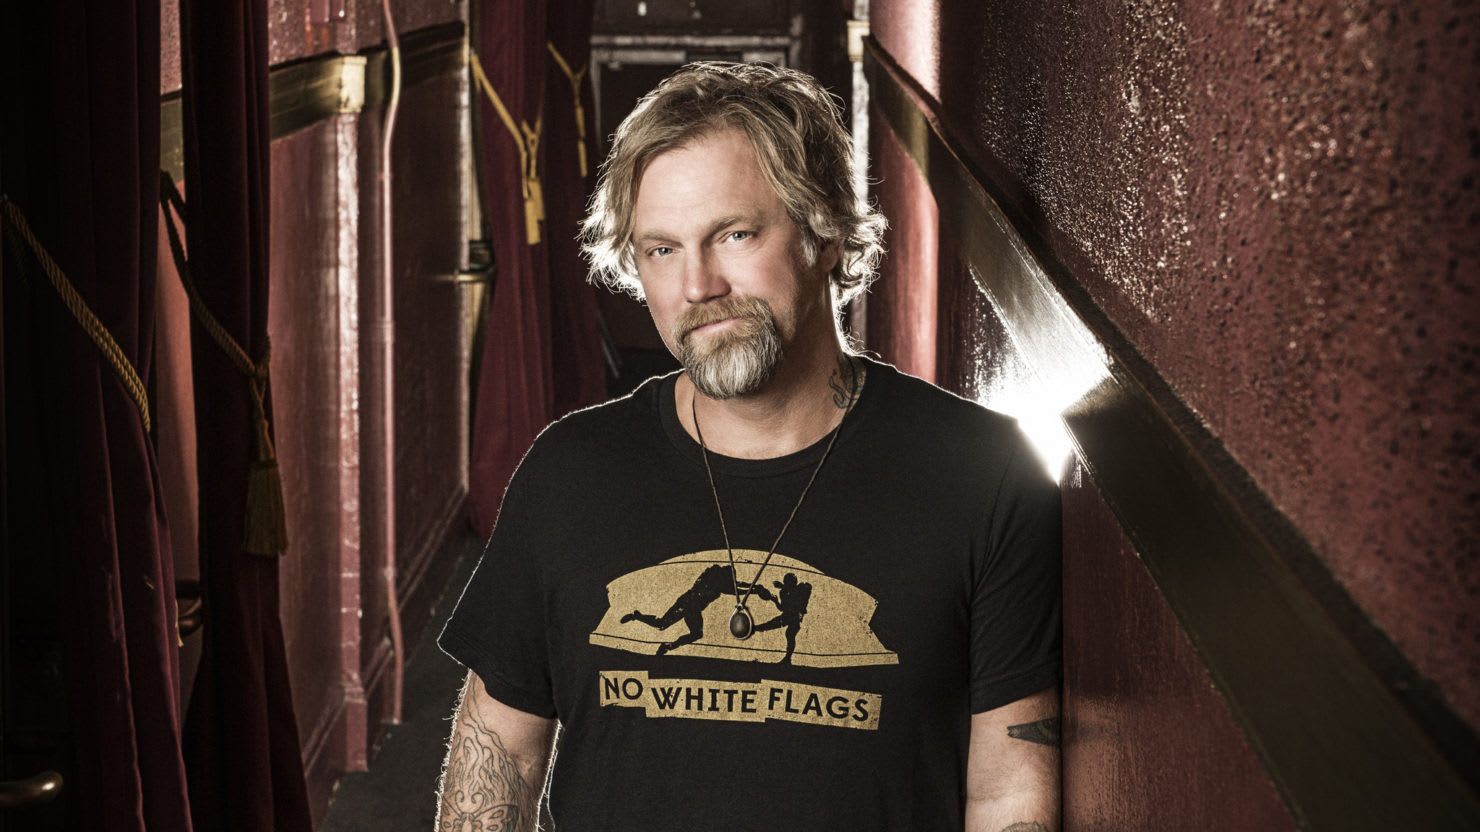 Anders Osborne Tour Dates and Concert Tickets